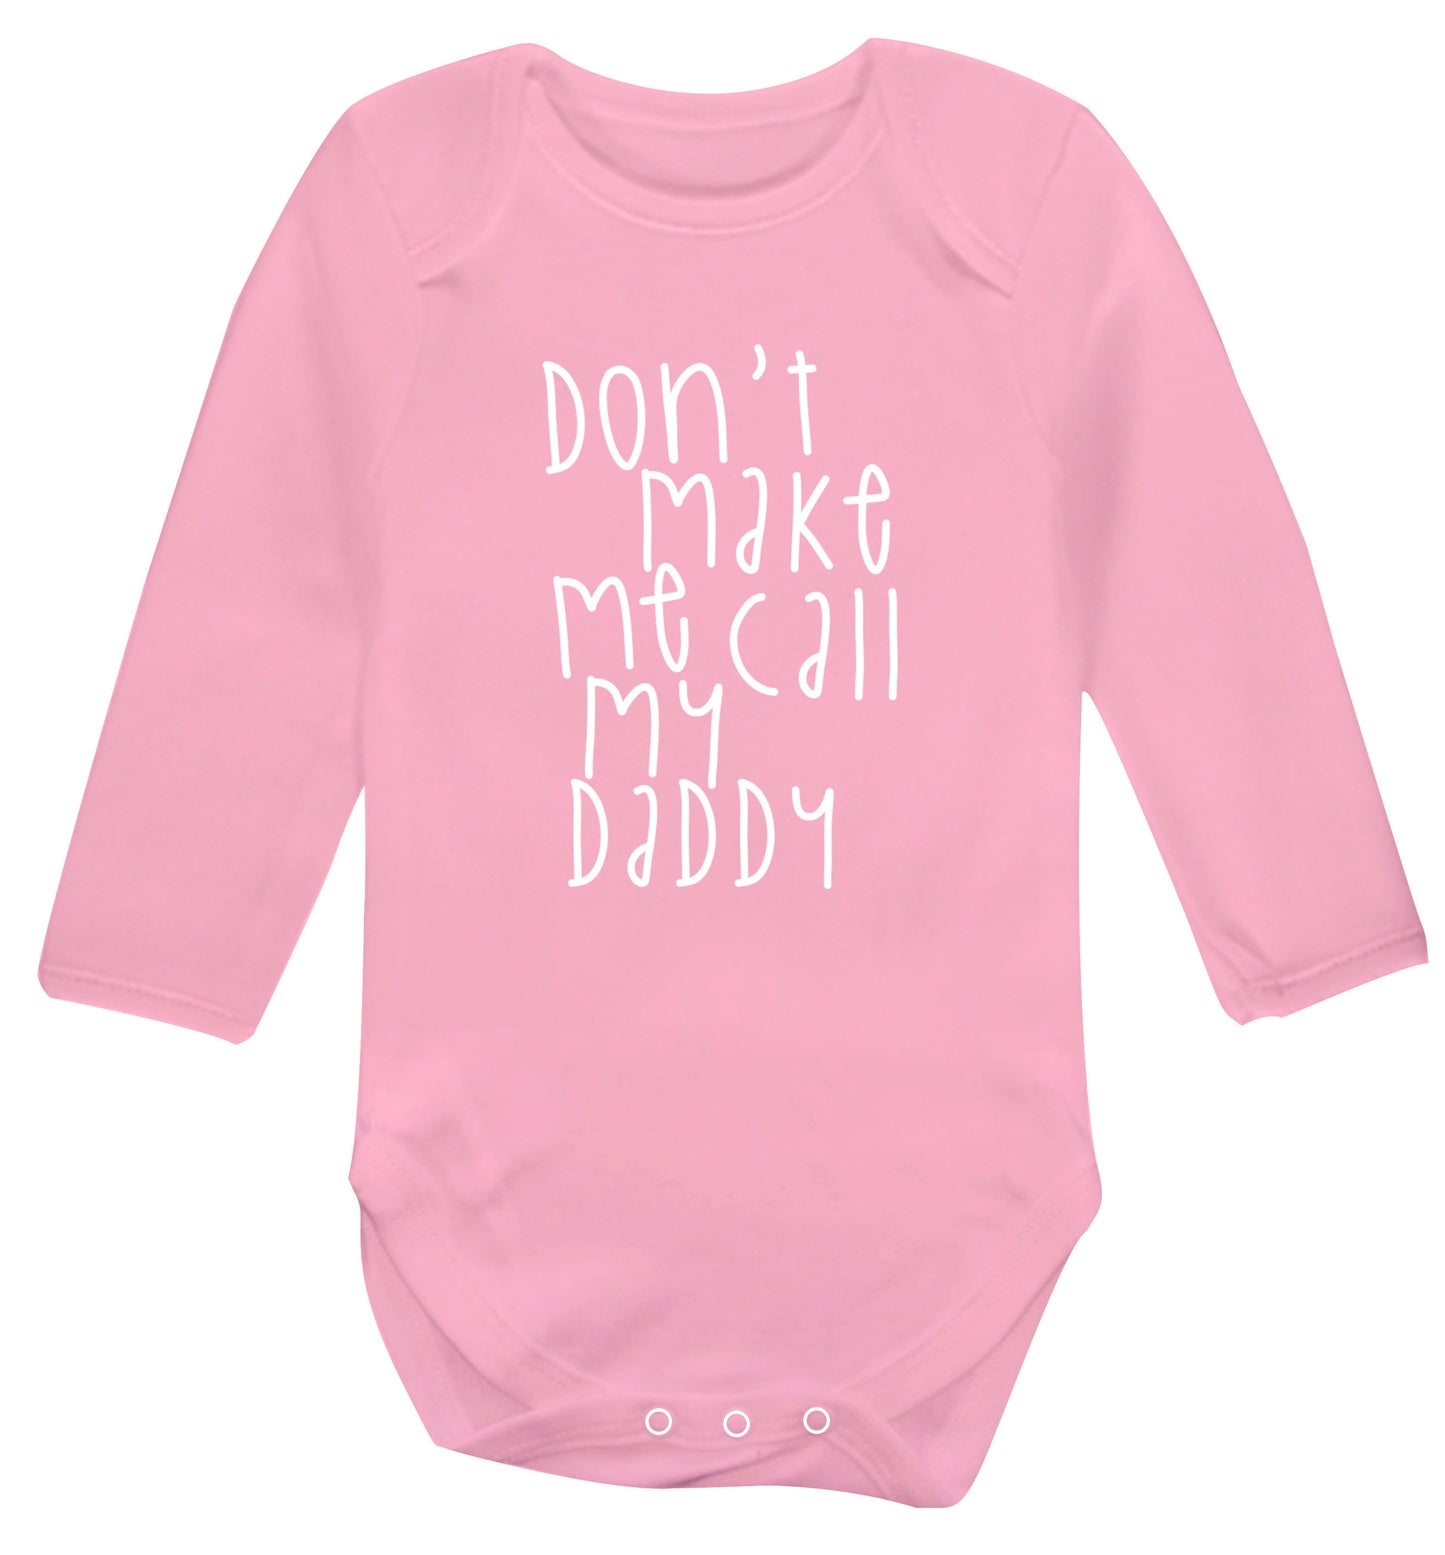 Don't make me call my daddy Baby Vest long sleeved pale pink 6-12 months